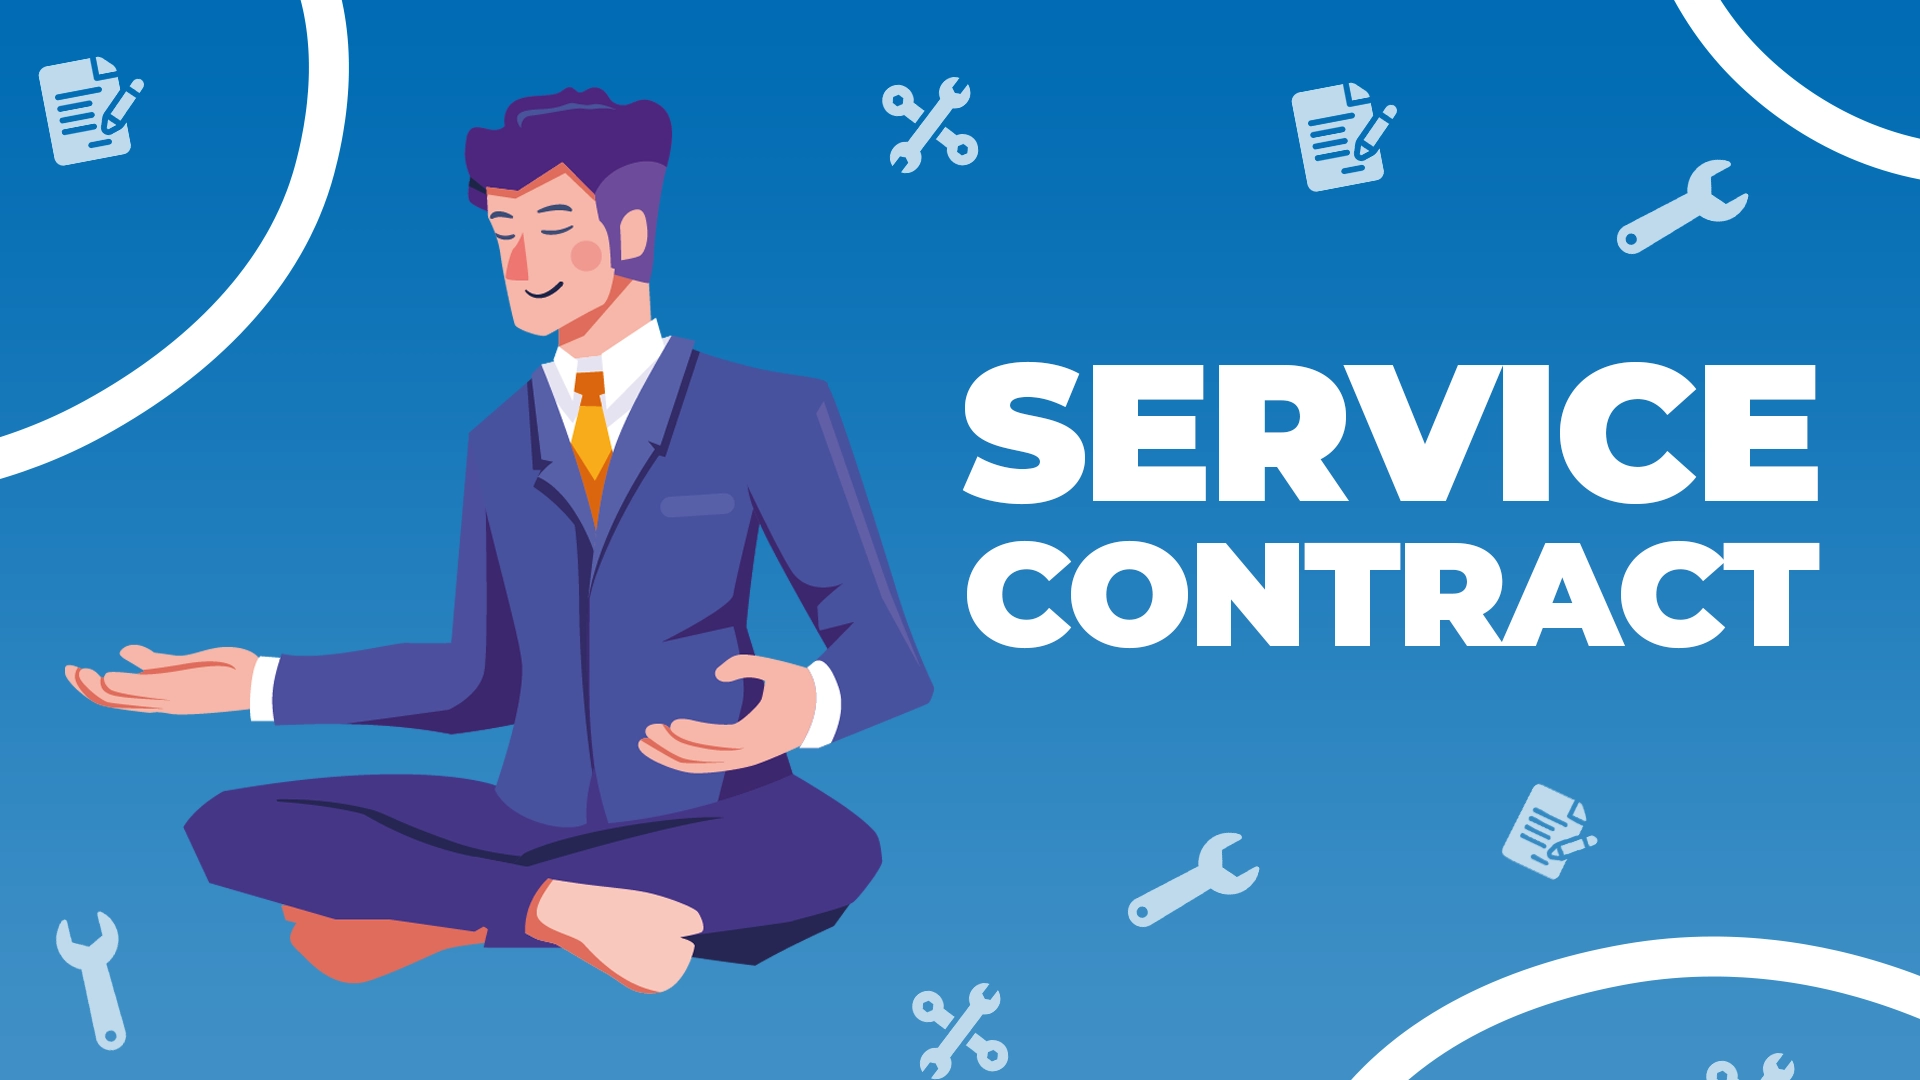 Give Yourself Some Peace of Mind With A Service Contract From Gordian